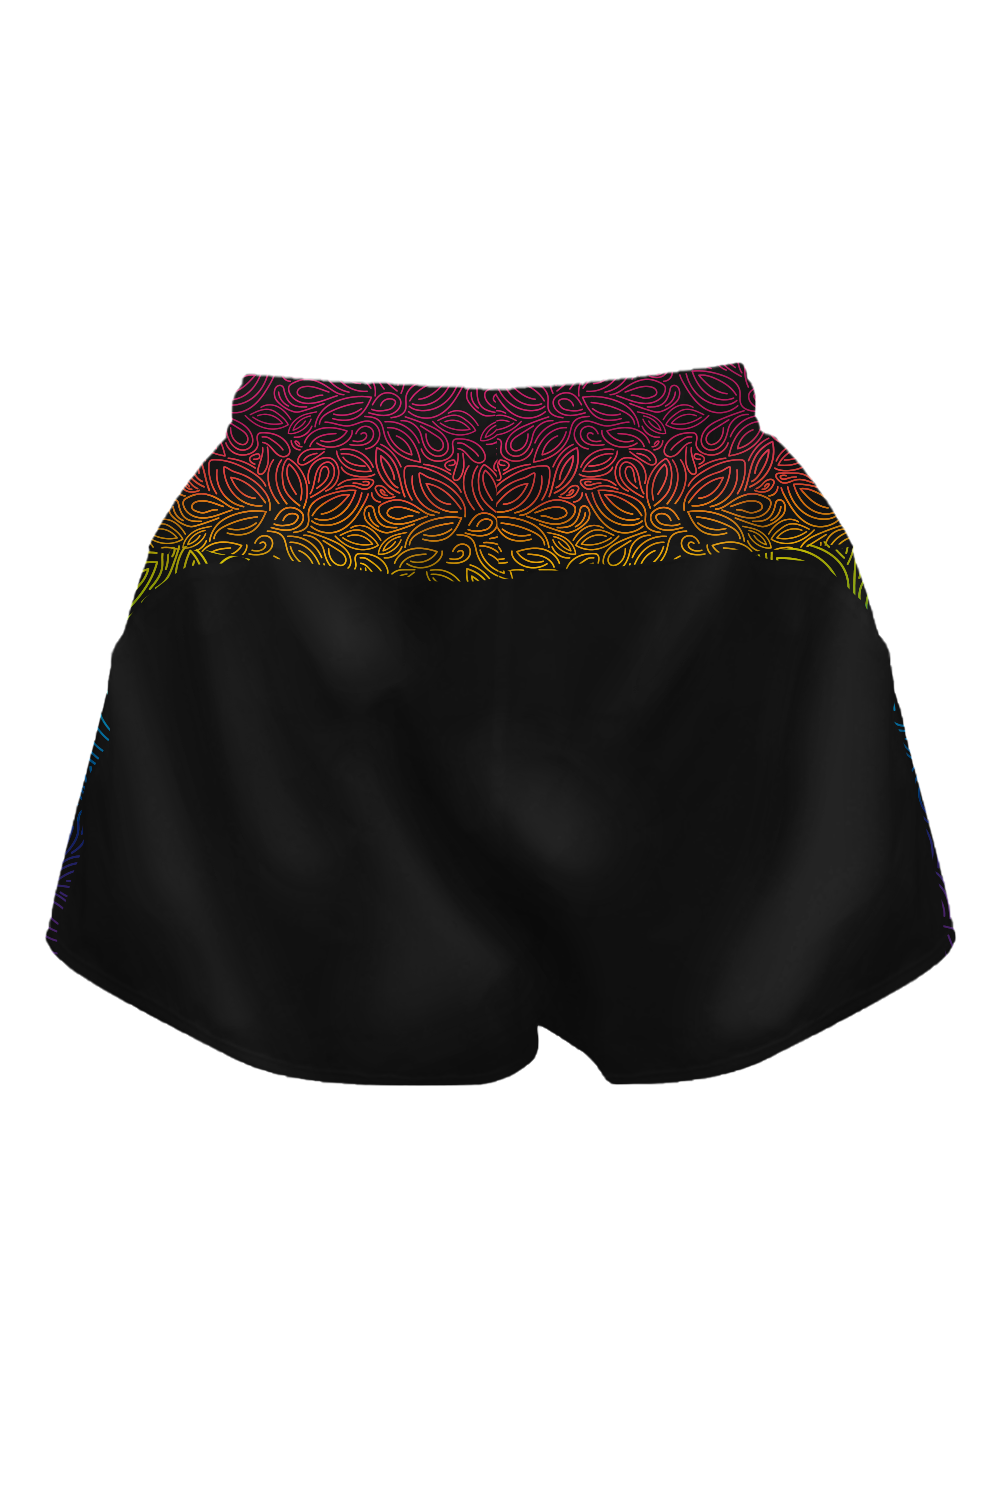 Floral Muse Racer Shorts